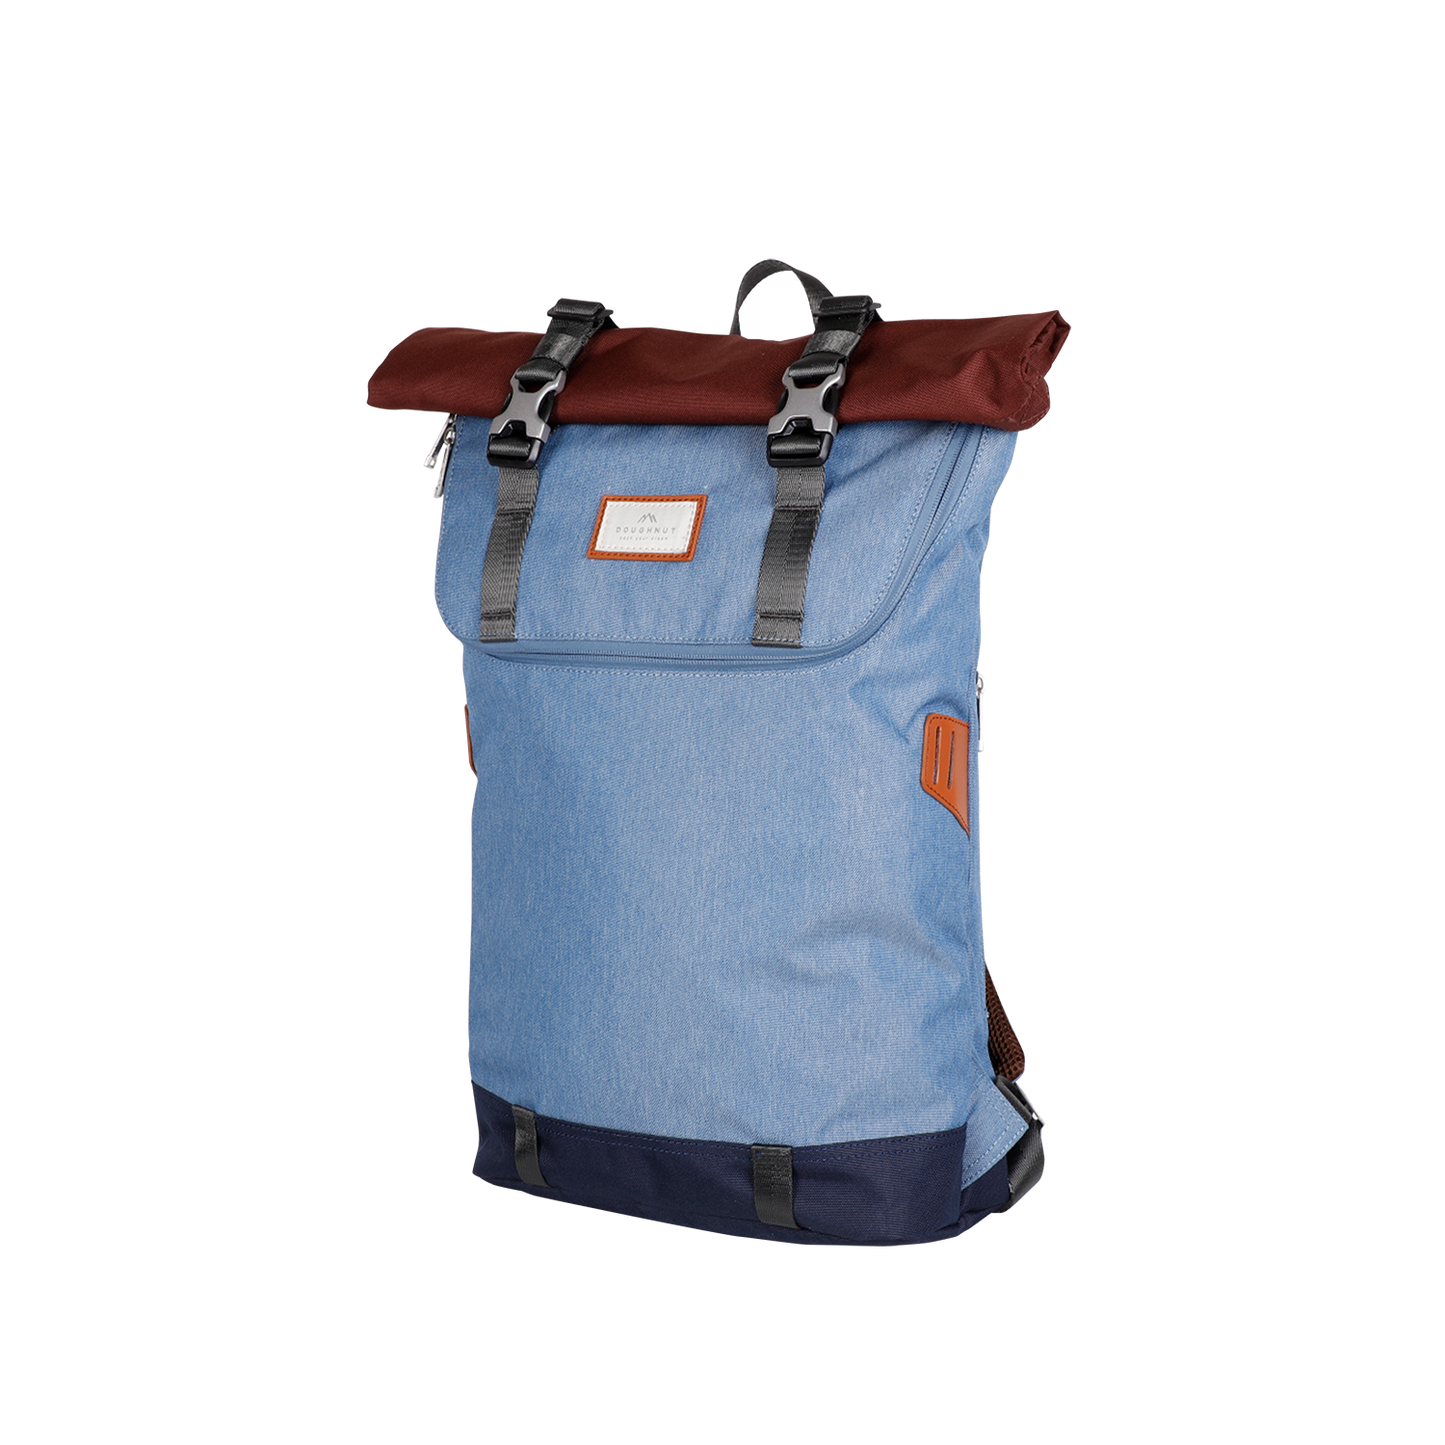 Christopher Earth Tone Series Backpack